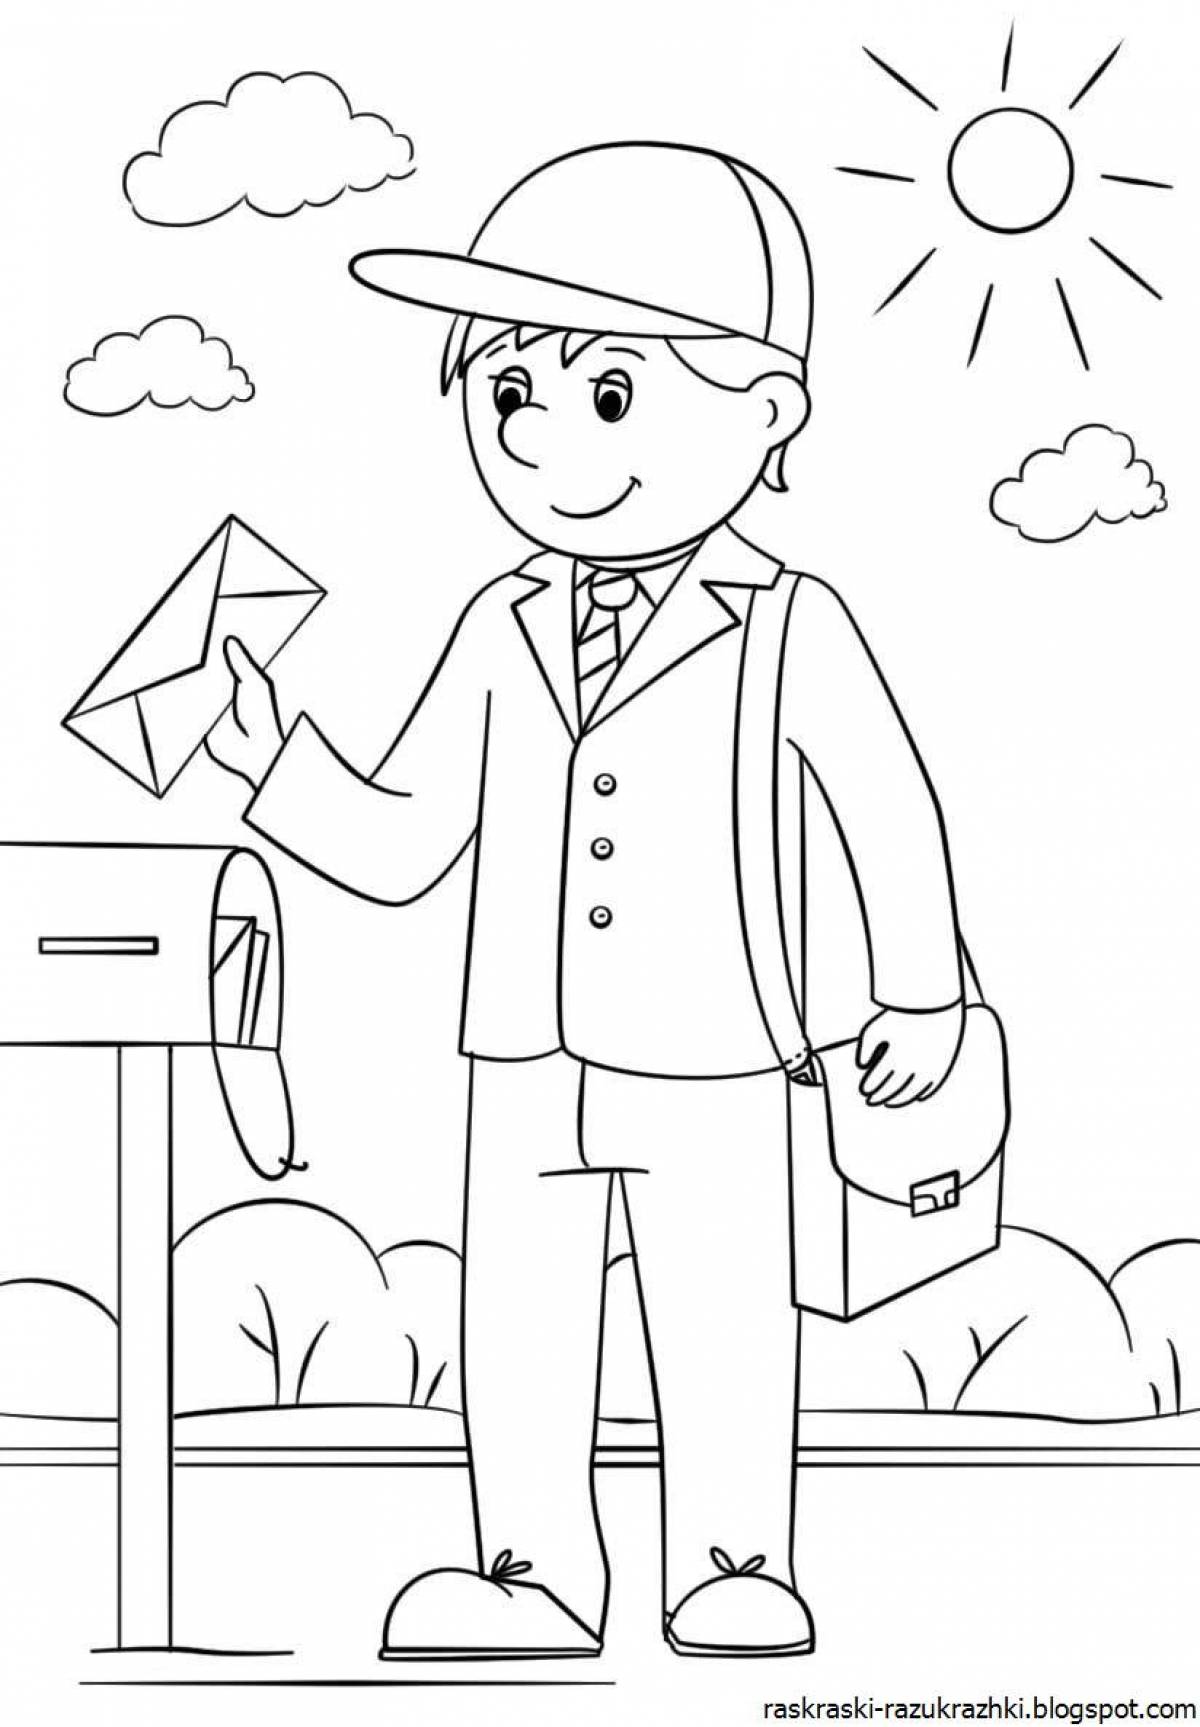 Creative profession coloring book for 4-5 year olds